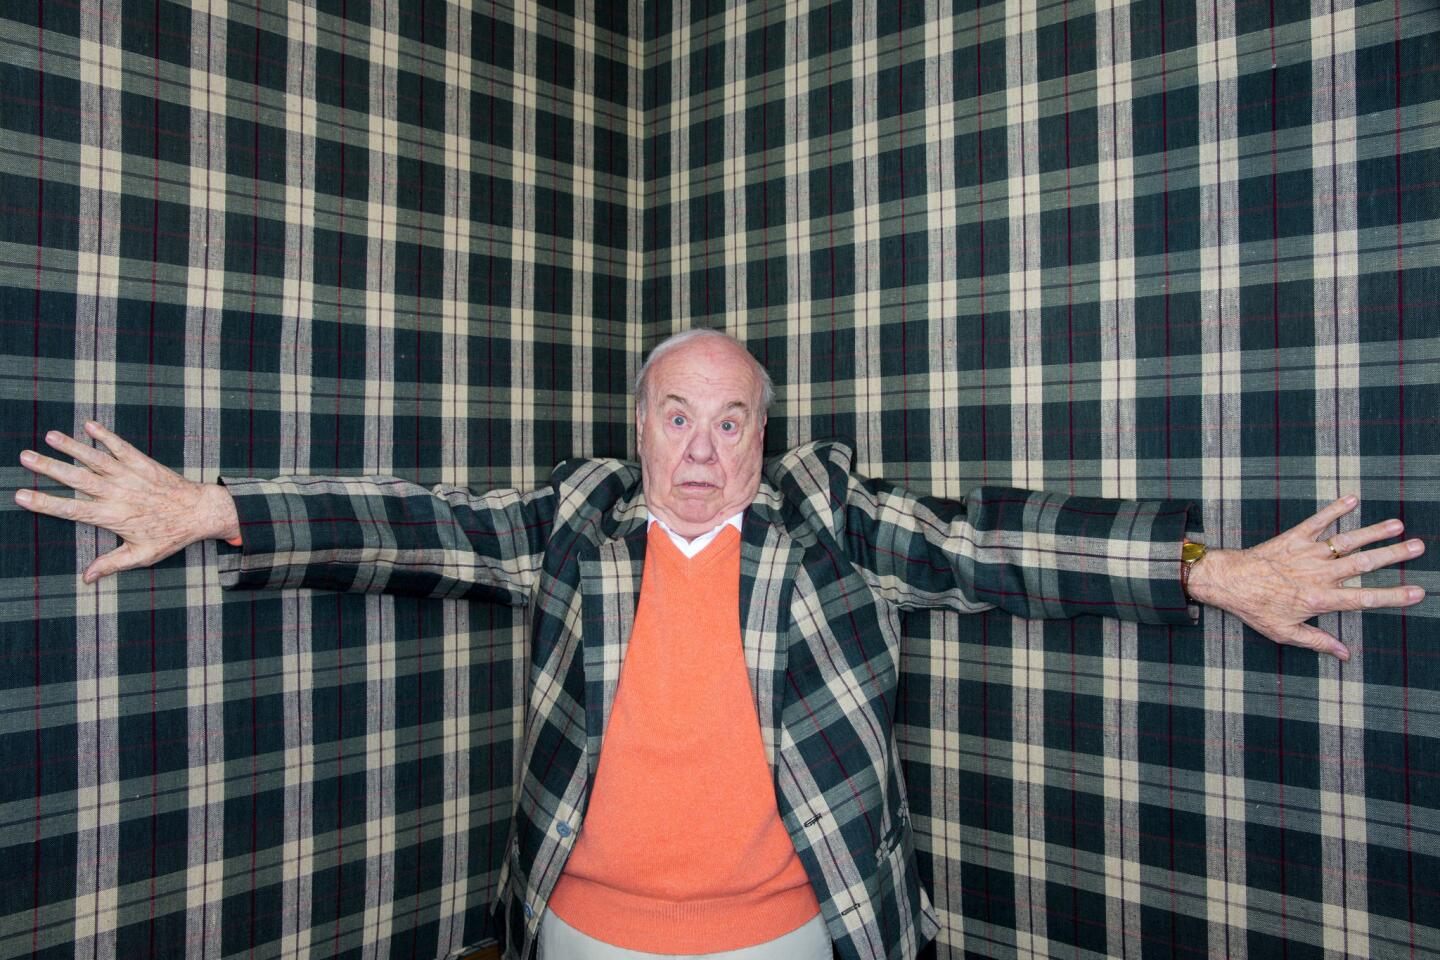 Emmy Award-winning actor and comedian Tim Conway in his Los Angeles area home, in advance of his new autobiography, "What's So Funny? My Hilarious Life."